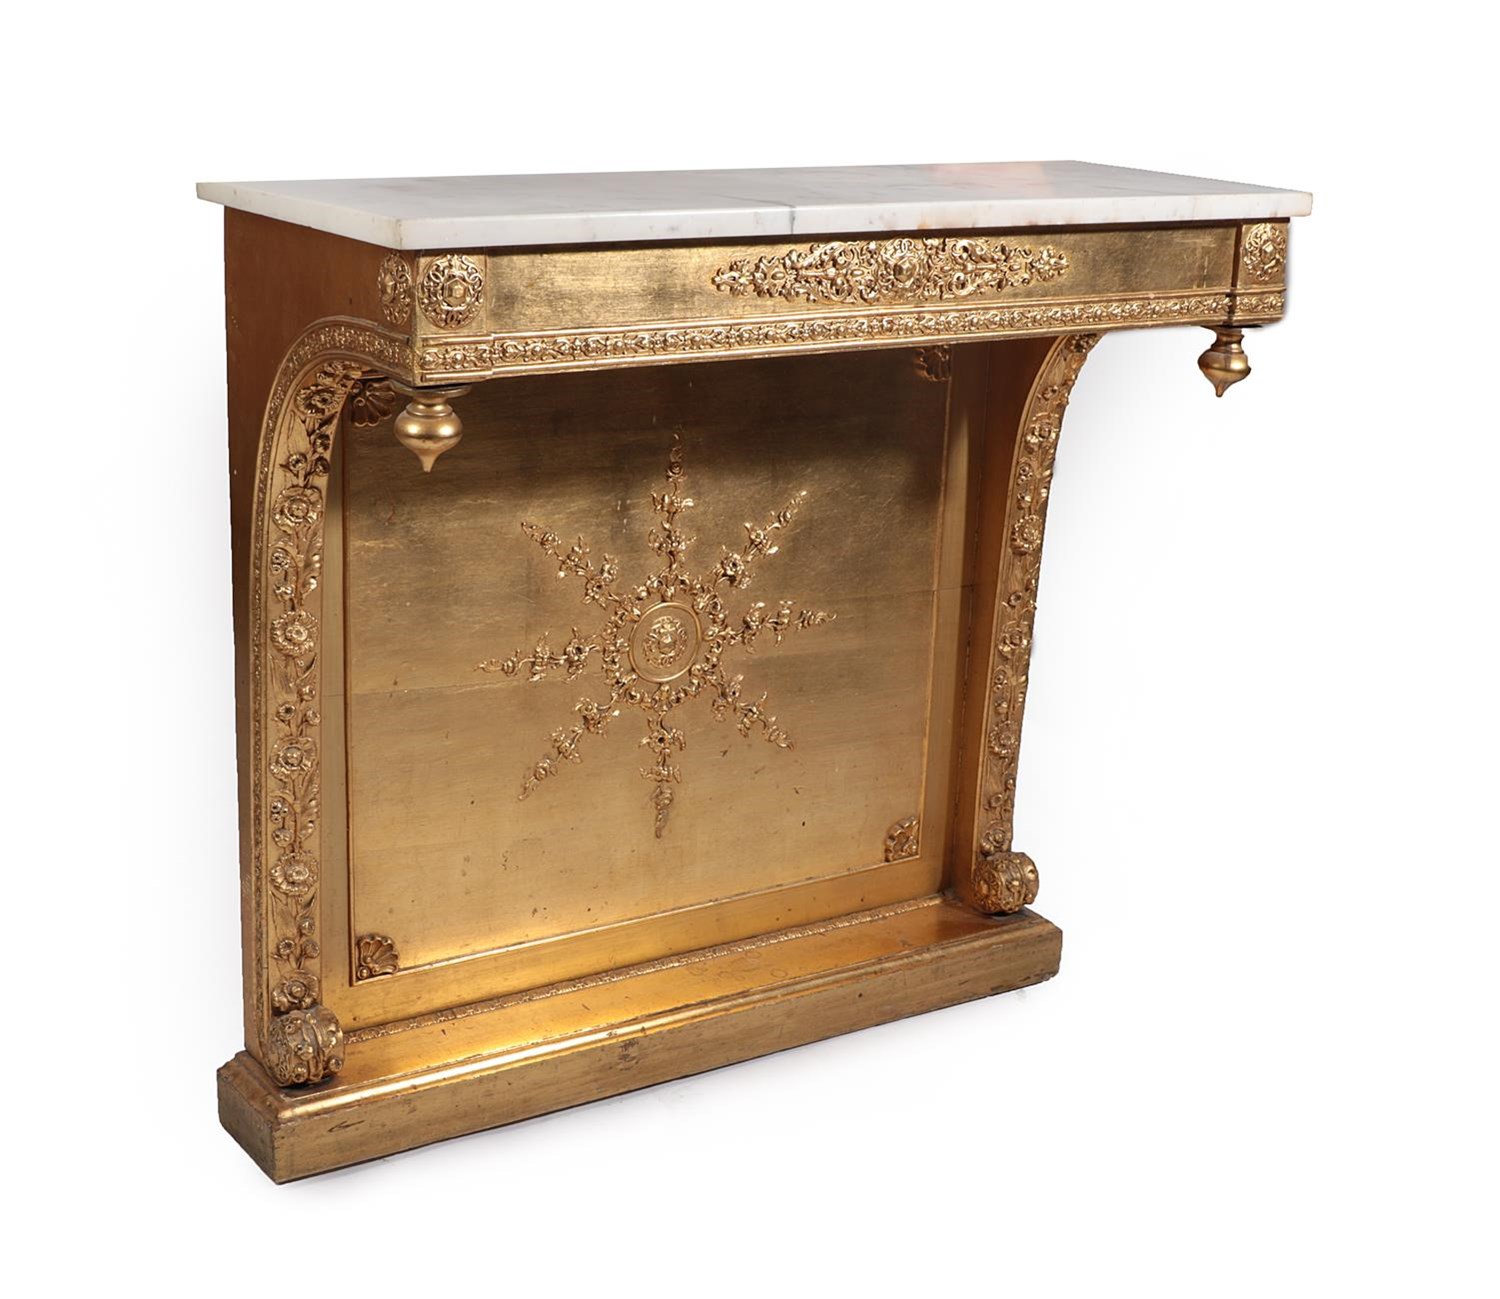 Lot 22 - A Victorian Gilt and Gesso Console Table, 3rd quarter 19th century, the later grey and white...